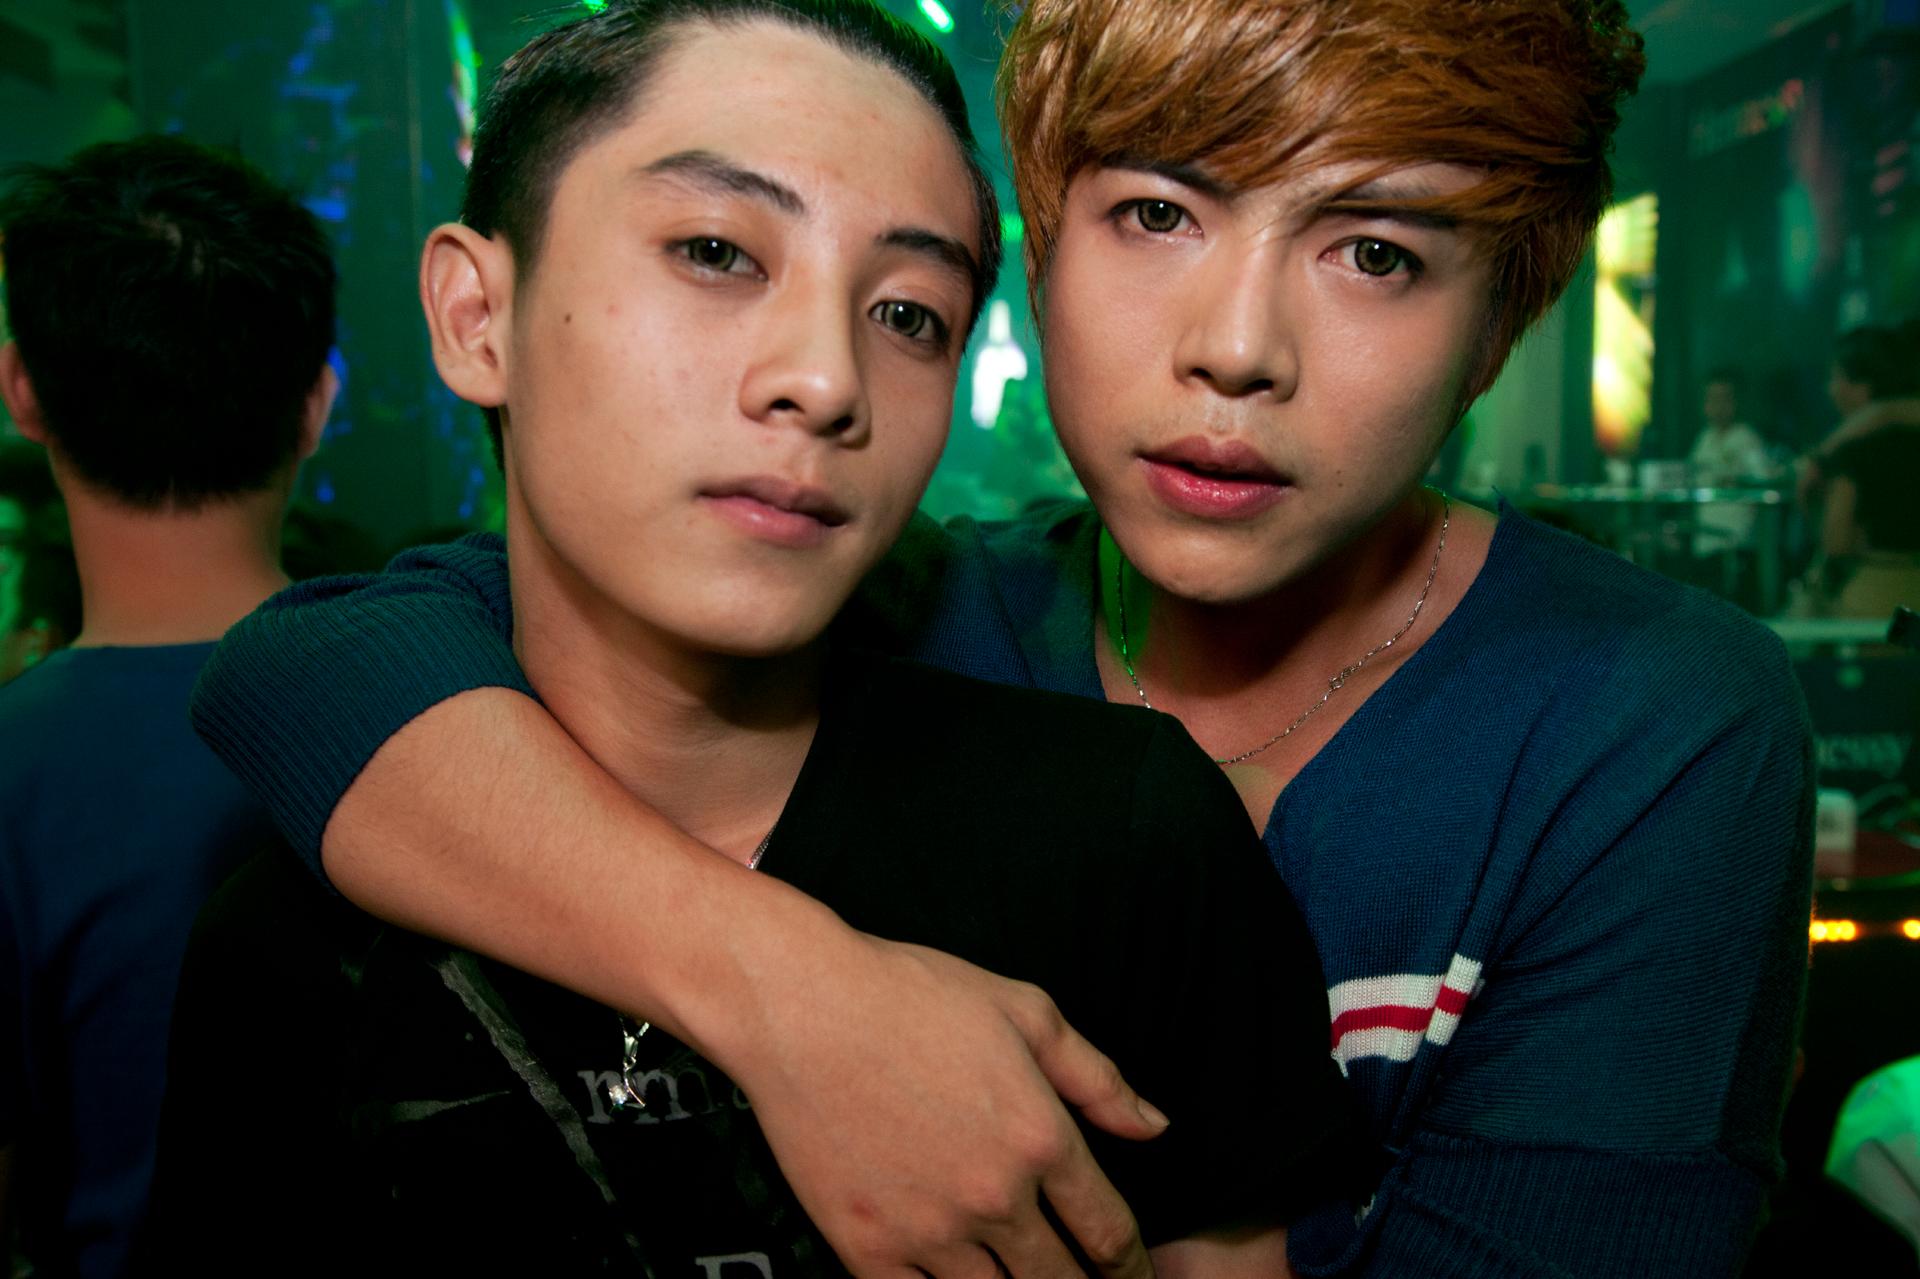 Although same-sex marriage isn’t legal, Vietnam is at the forefront of gay rights in the region and gay weddings are not uncommon.